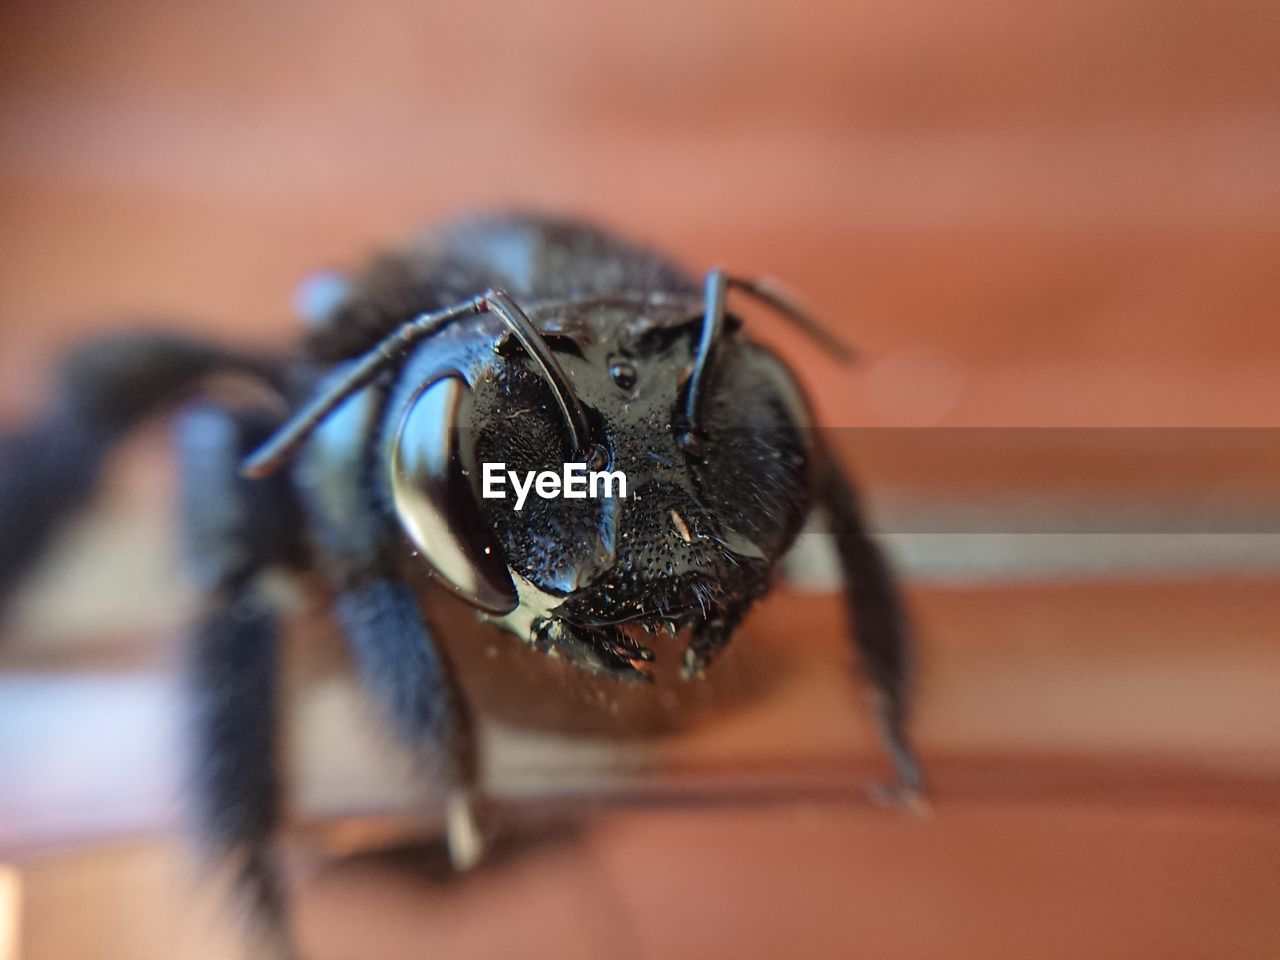 CLOSE-UP OF SPIDER IN A BLURRED